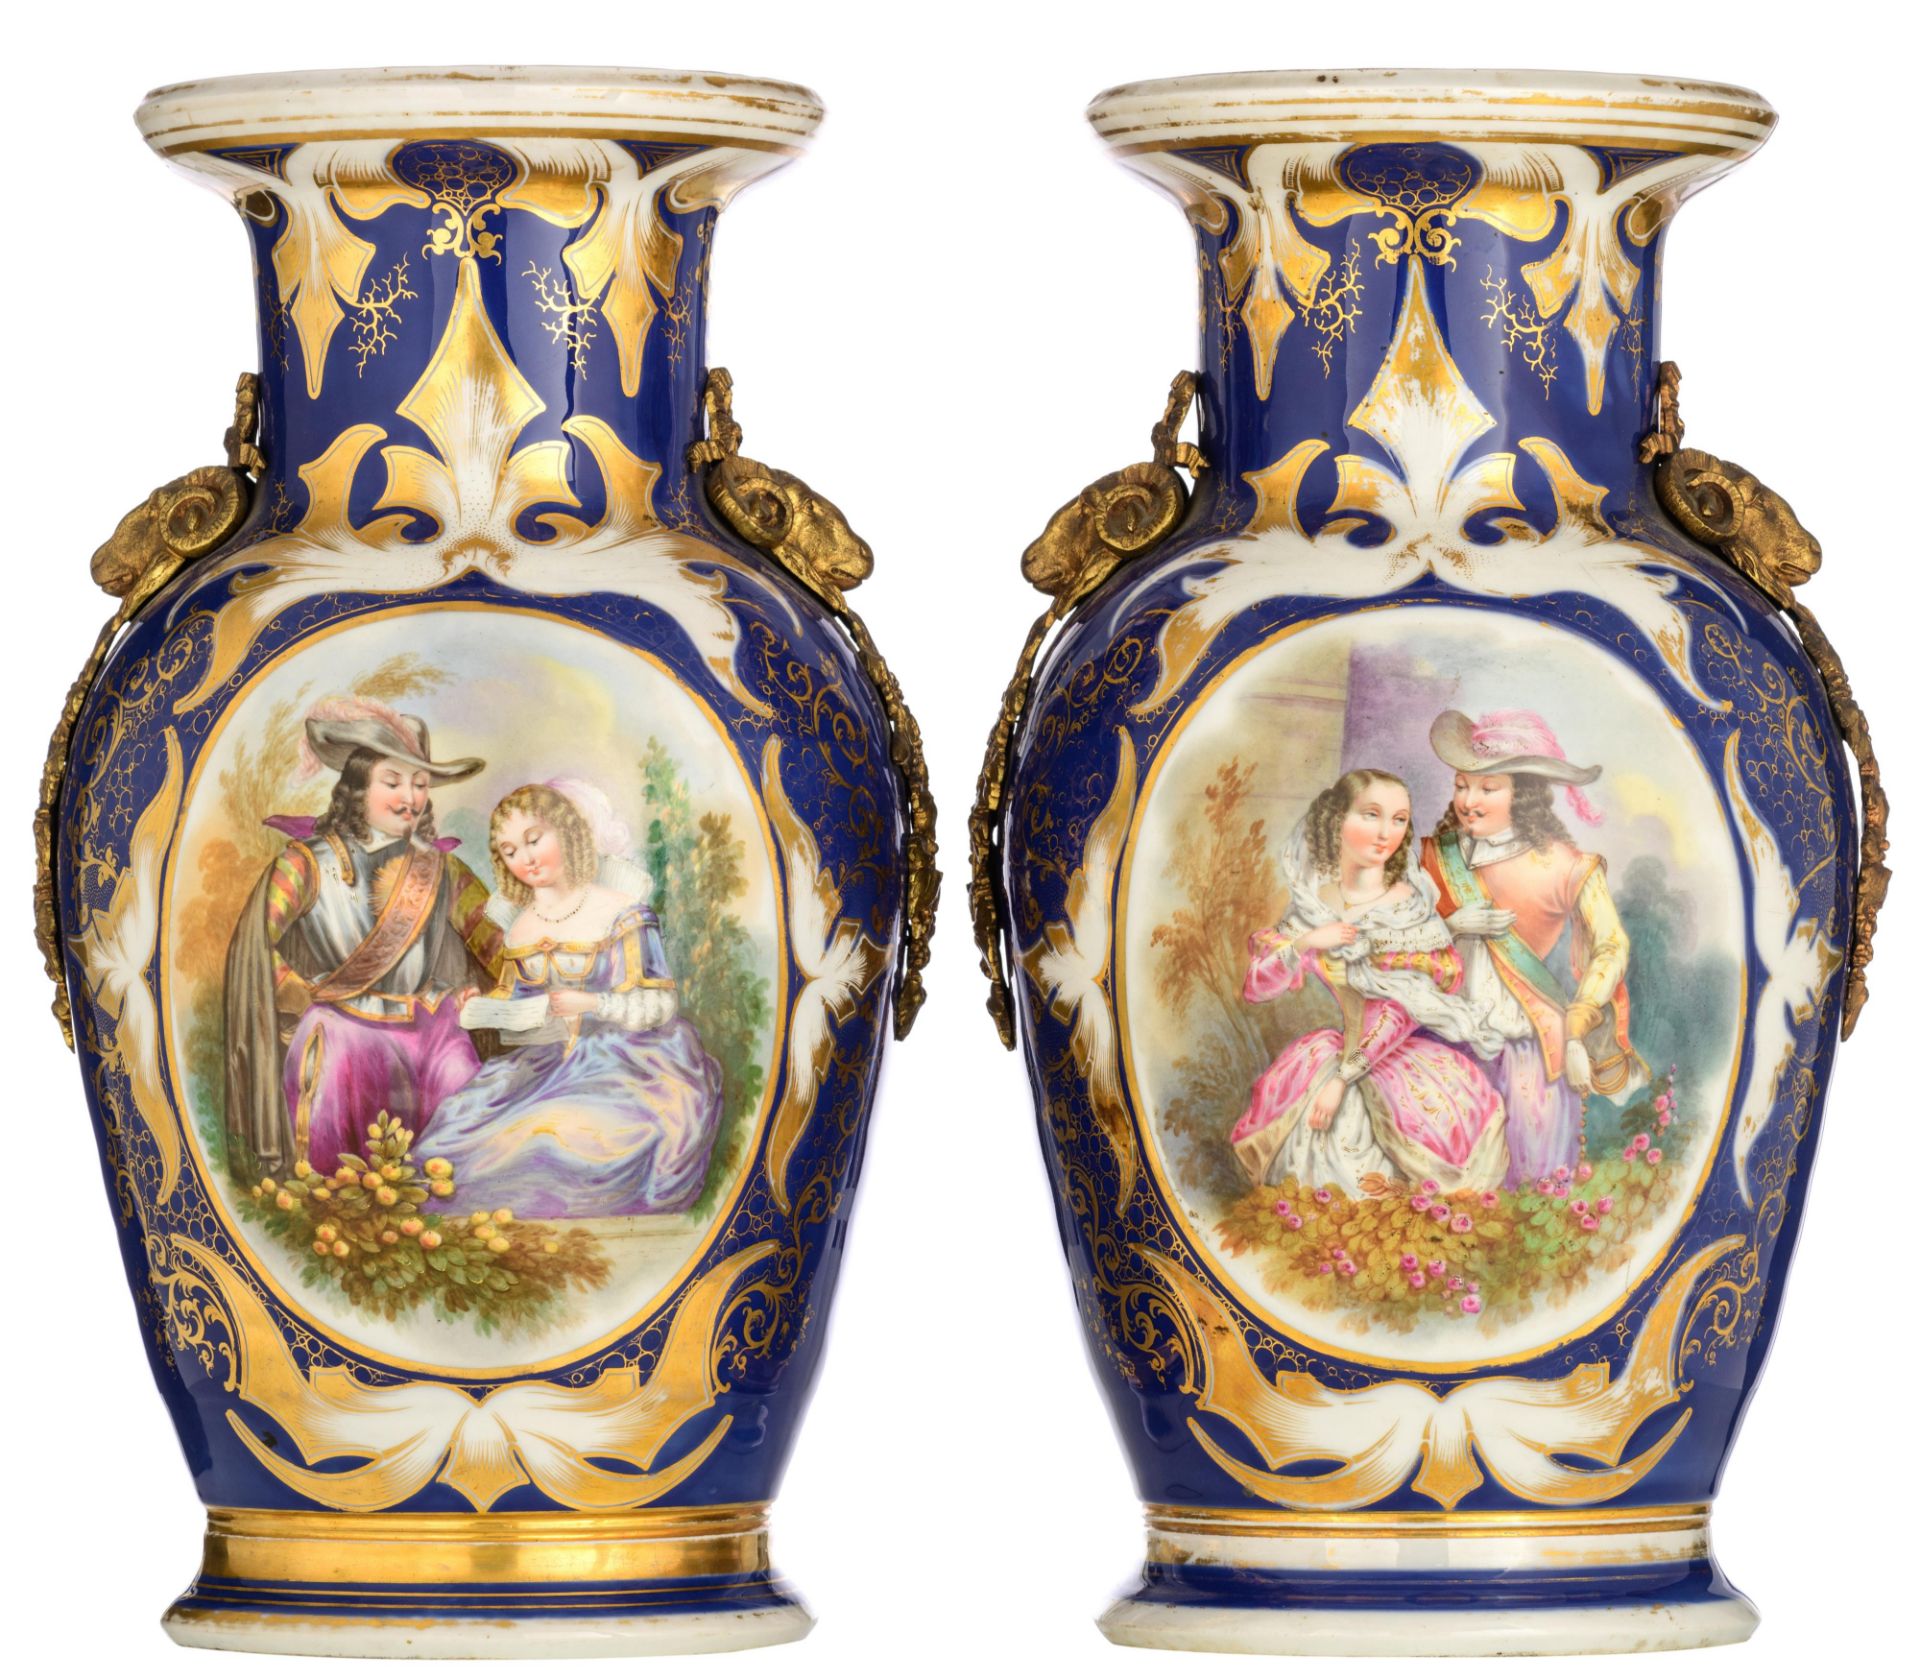 Two French blue ground porcelain vases with bronze mounts, the roundels decorated with gallant scene